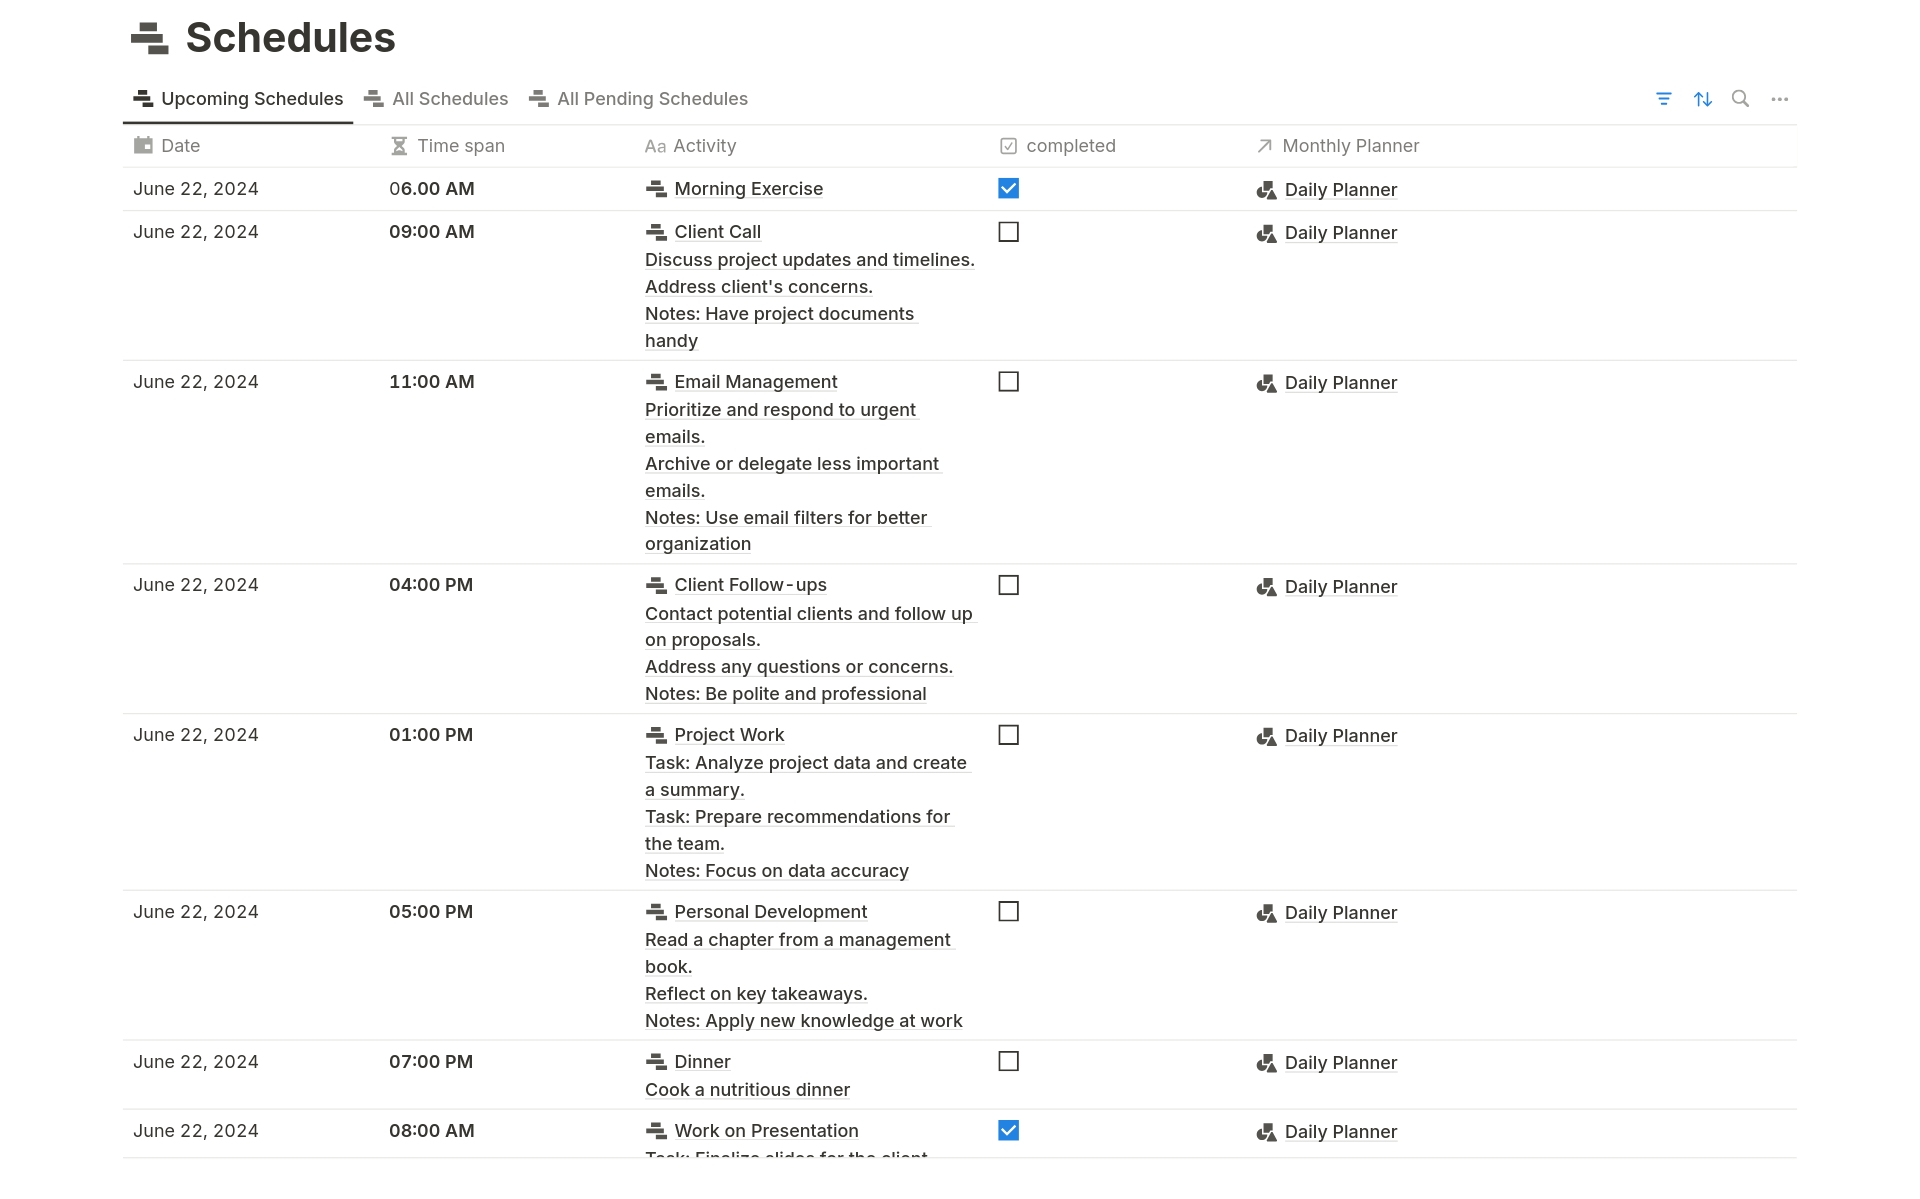 Plan your days by schedules, notes & To-dos